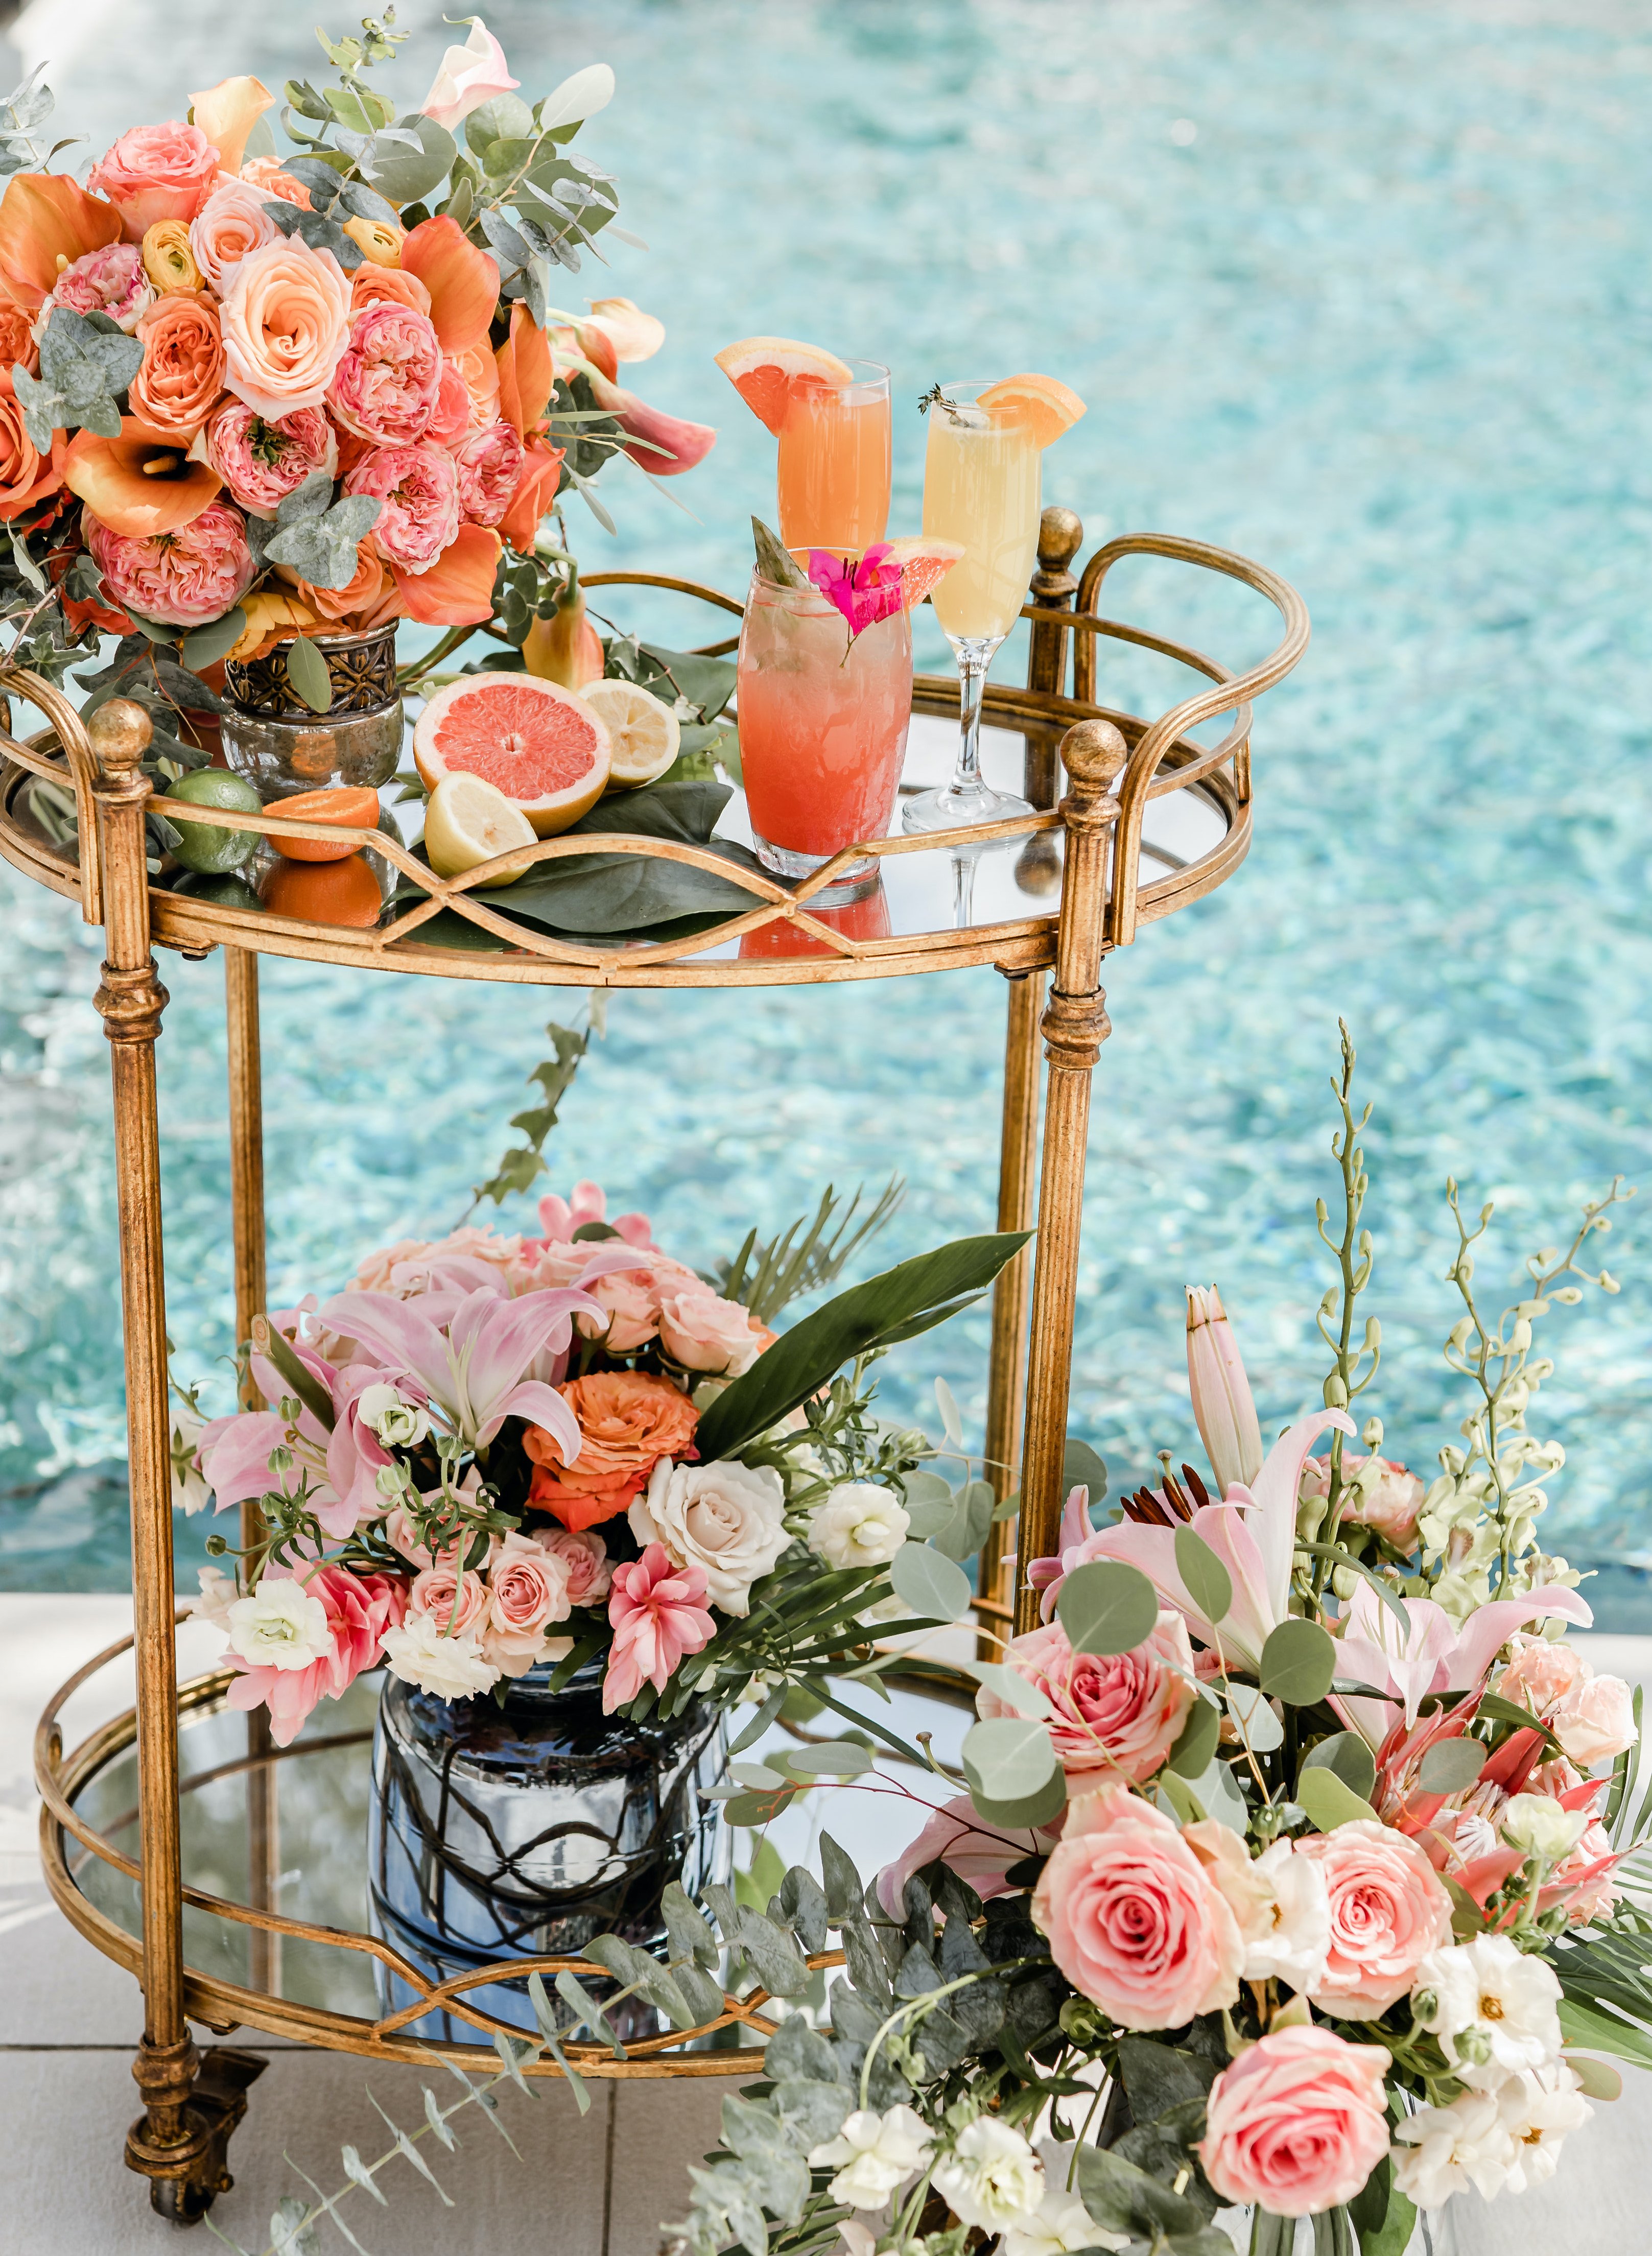 A cocktail cart full of tropical flowers and fun cocktails is by the pool at The San Luis Resort, Spa & Conference Center.